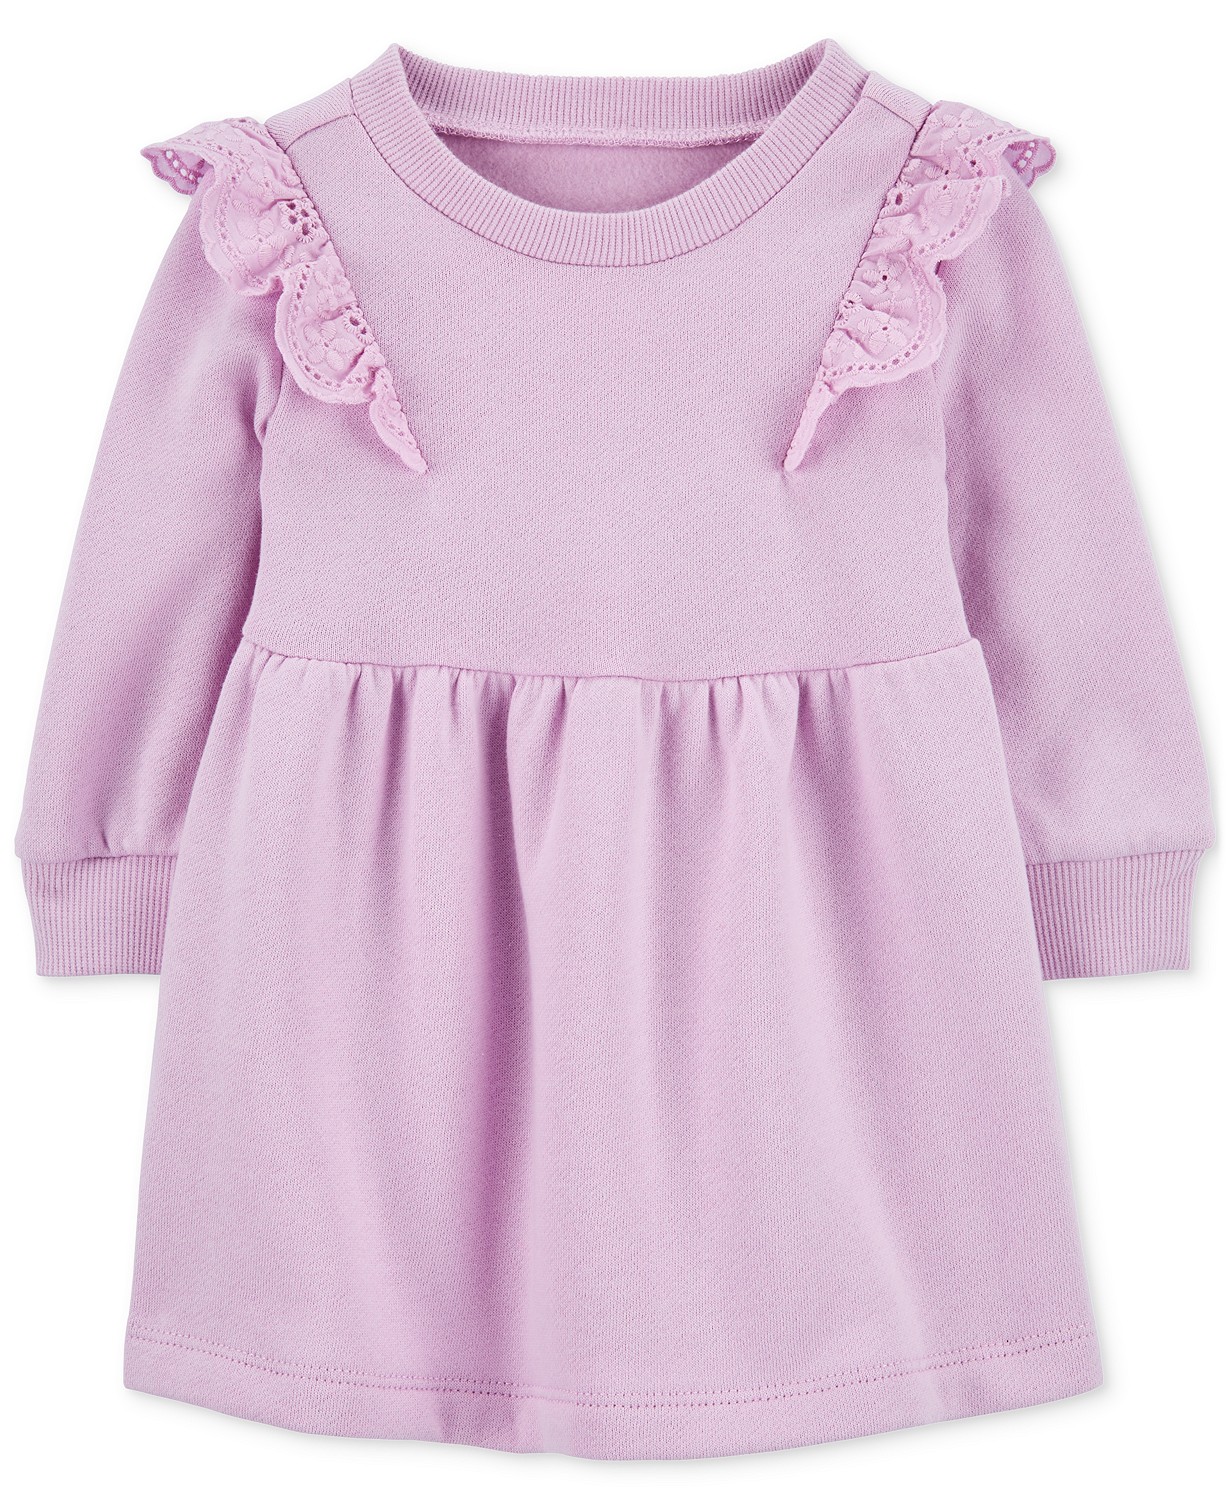 Carters Baby Girls Long-Sleeve Fleece Dress with Diaper Cover